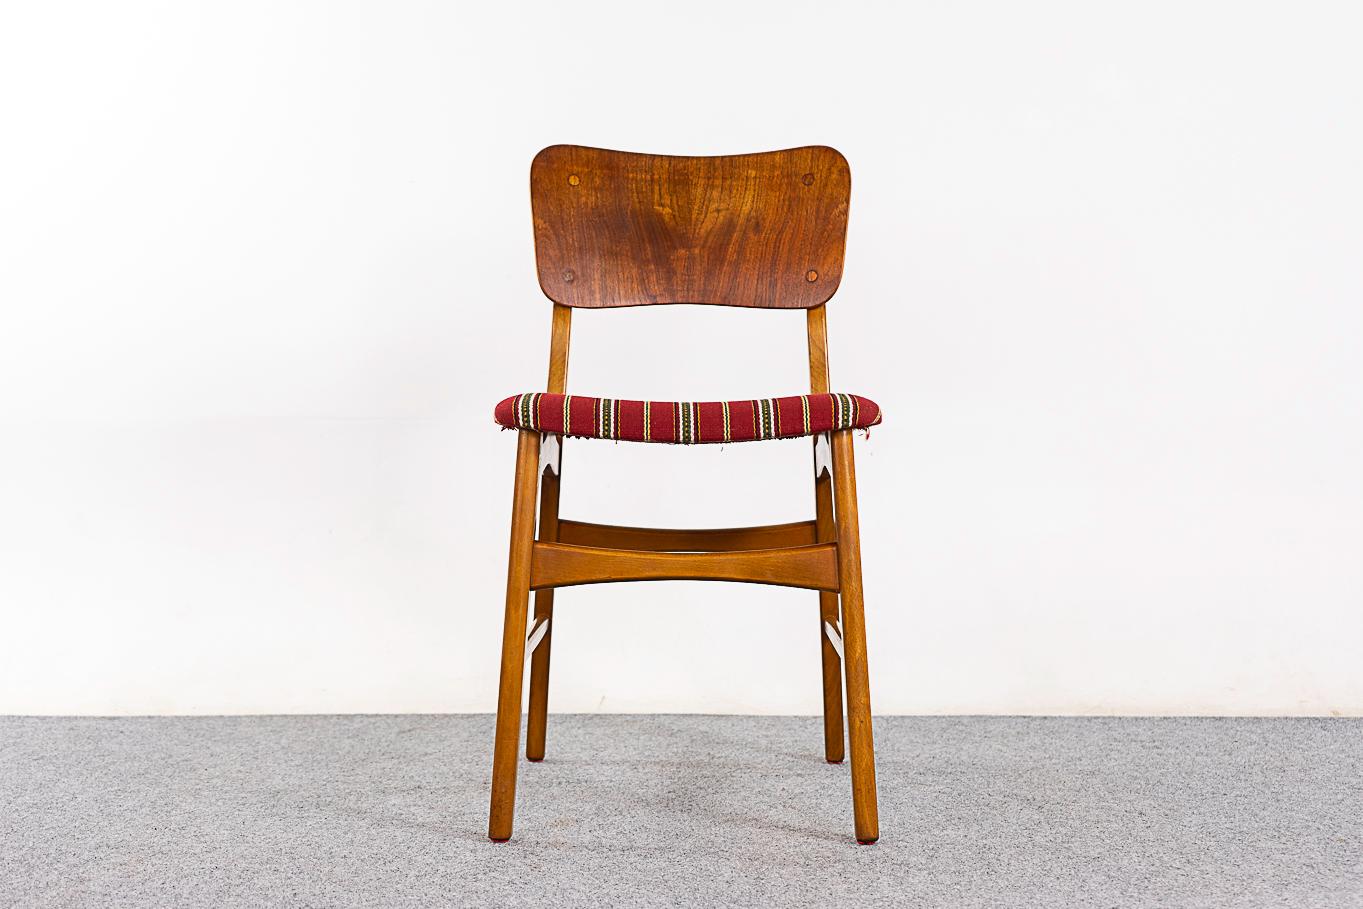 Teak & beech mid-century dining chairs, circa 1960's. Comfortable curved teak backrests contrast nicely with the beech frame. Bowtie cross bars add stability. Original upholstery in nice condition, removable seat pad makes reupholstering a snap!  